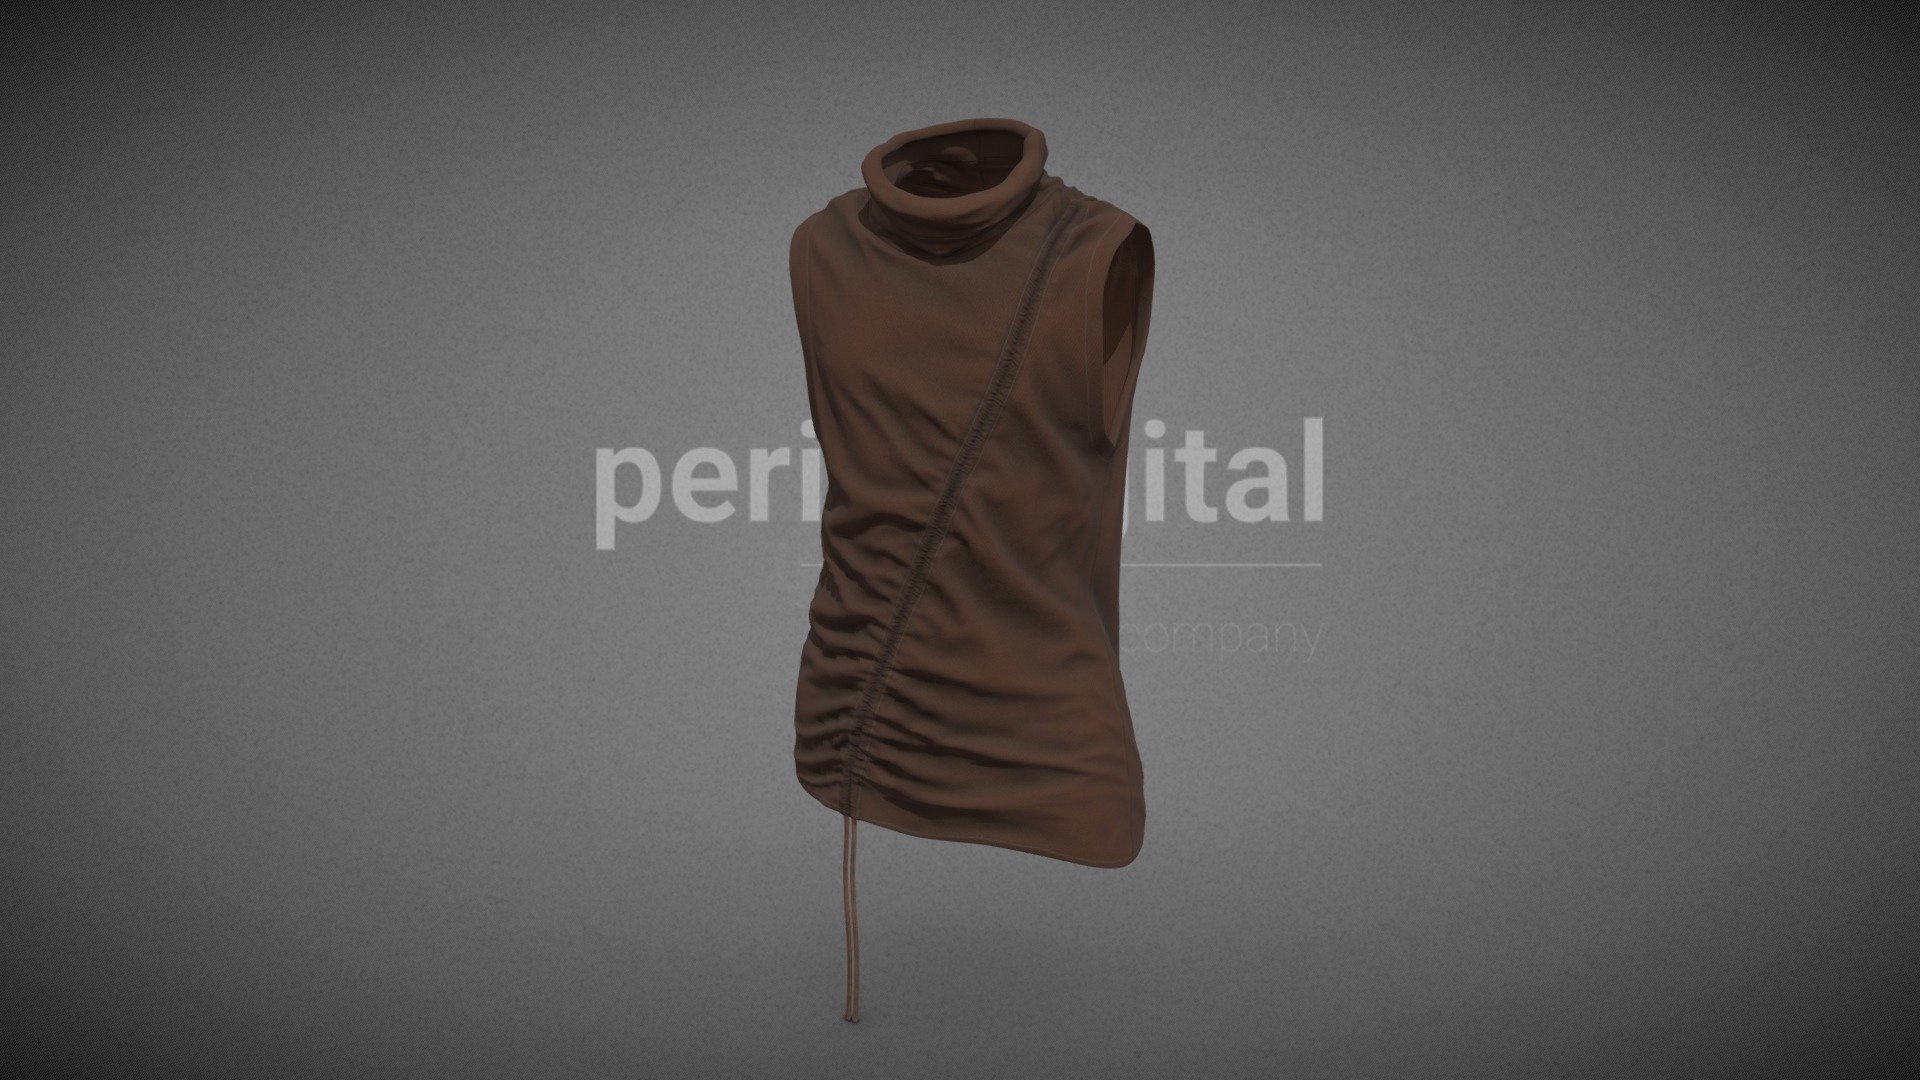 Our Wasteland Garments collection consists of several garments, which you can use in your audiovisual creations, extracted and modeled from our catalog of photogrammetry pieces.

They are optimized for use in 3D scenes of high polygonalization and optimized for rendering. We do not include characters, but they are positioned for you to include and adjust your own character. They have a model LOW (_LODRIG) inside the Blender file (included in the AdditionalFiles), which you can use for vertex weighting or cloth simulation and thus, make the transfer of vertices or property masks from the LOW to the HIGH** model.

We have included the texture maps in high resolution, as well as the Displacement maps, so you can make extreme point of view with your 3D cameras, as well as the Blender file so you can edit any aspect of the set.

Enjoy it.

Web: https://peris.digital/ - Wasteland Garments Series - Model 11 Vest - Buy Royalty Free 3D model by Peris Digital (@perisdigital) 3d model